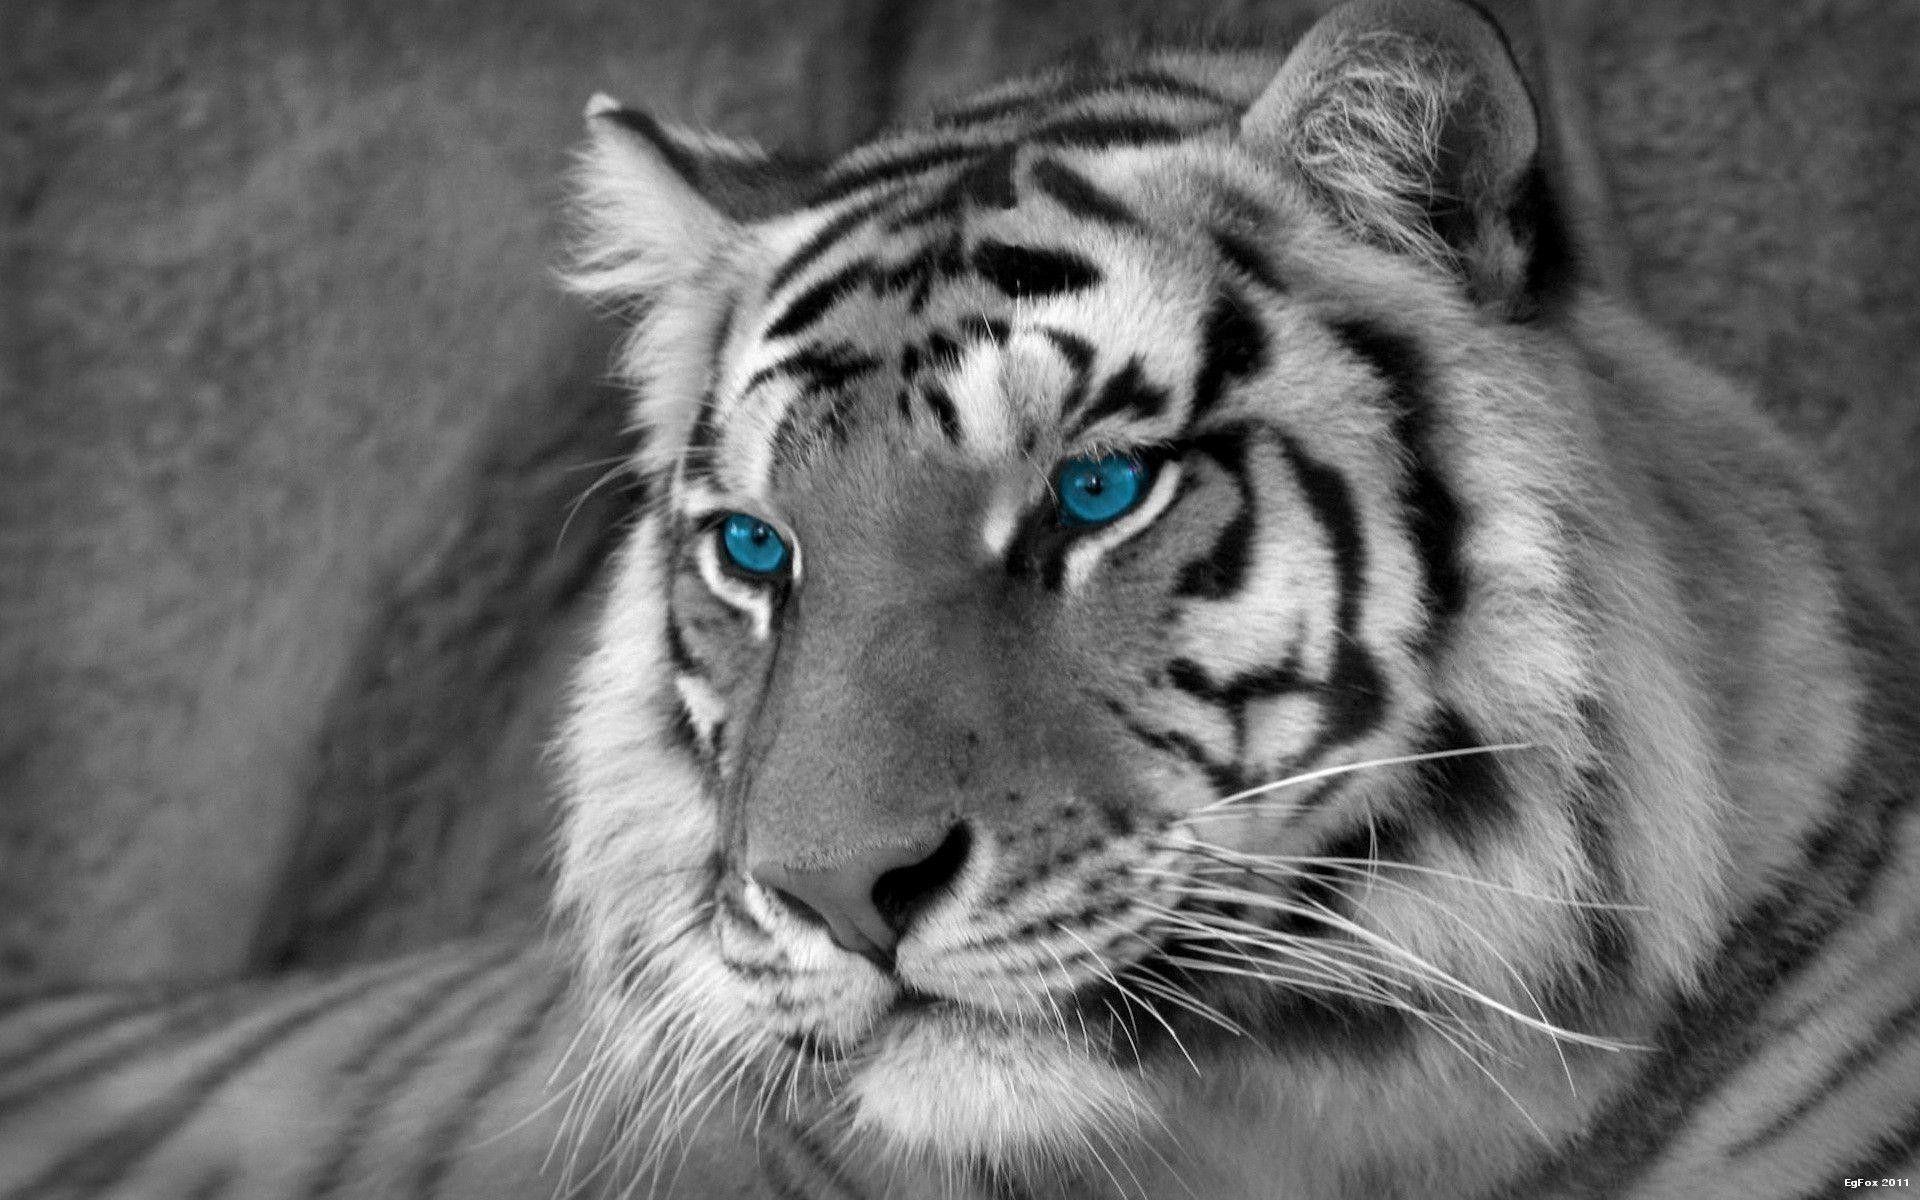 White Tiger Wallpapers - Top Free White Tiger Backgrounds - WallpaperAccess